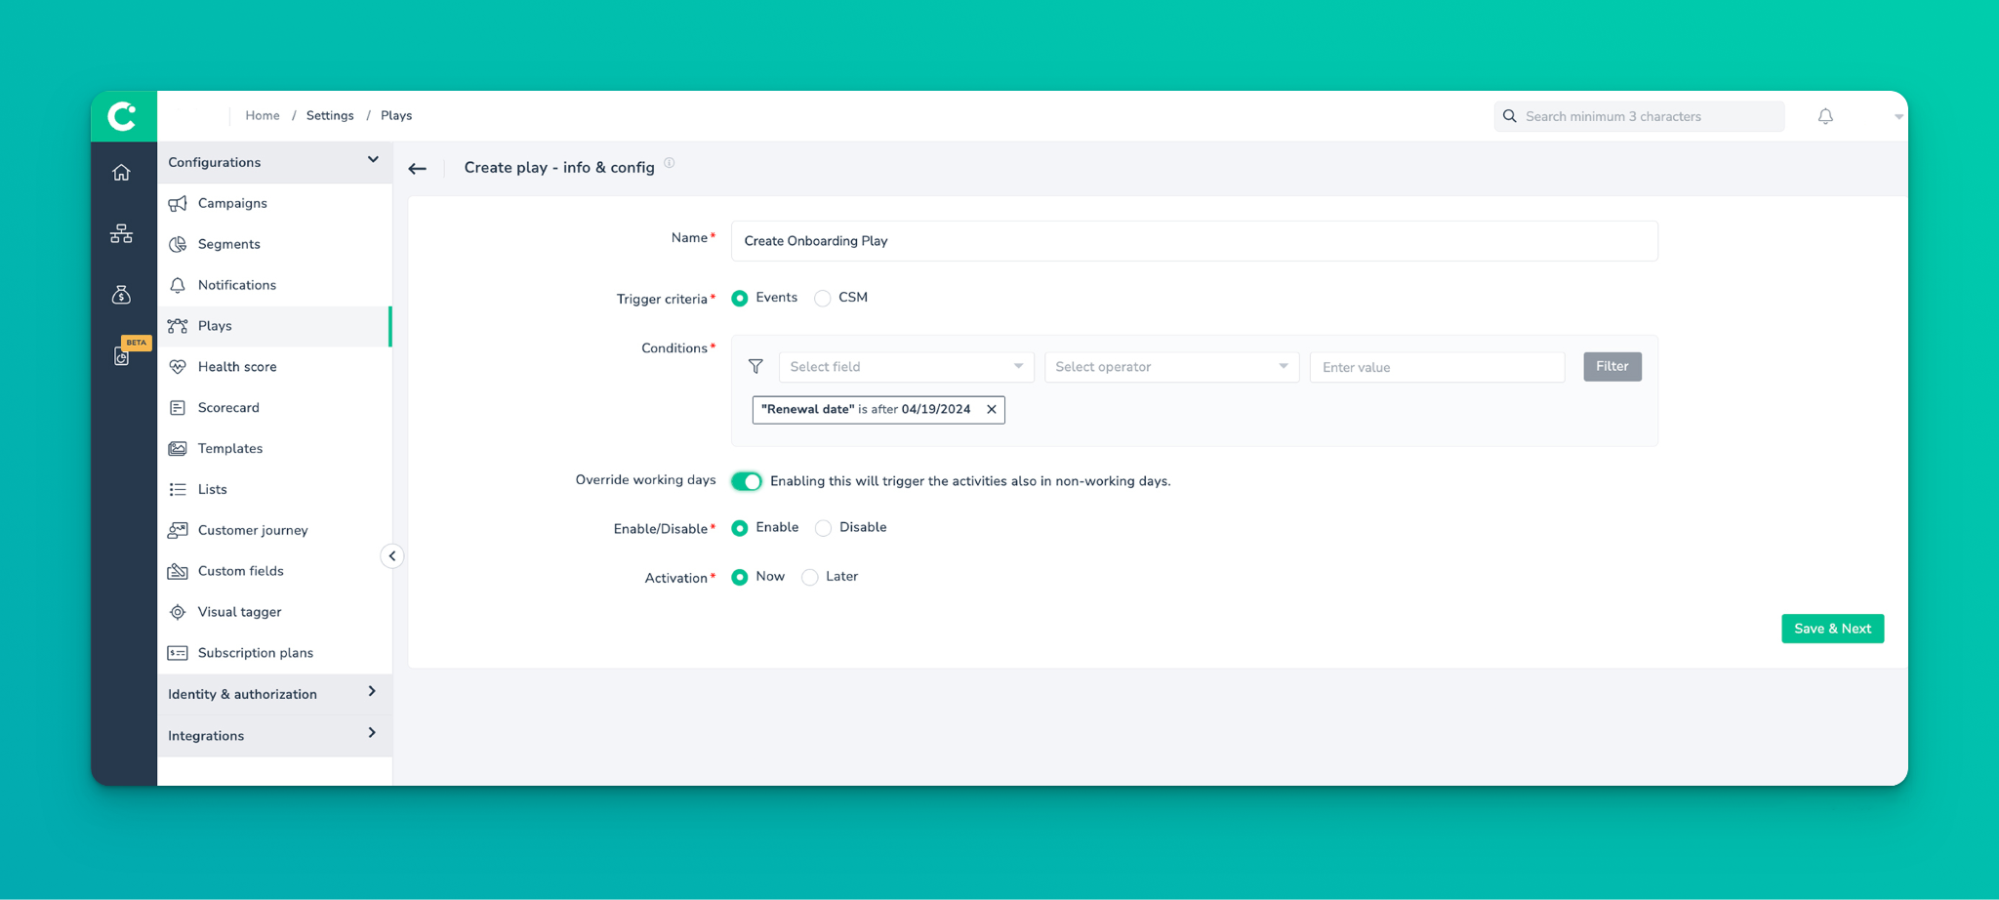 Create onboarding flow using the Play feature of Churn360